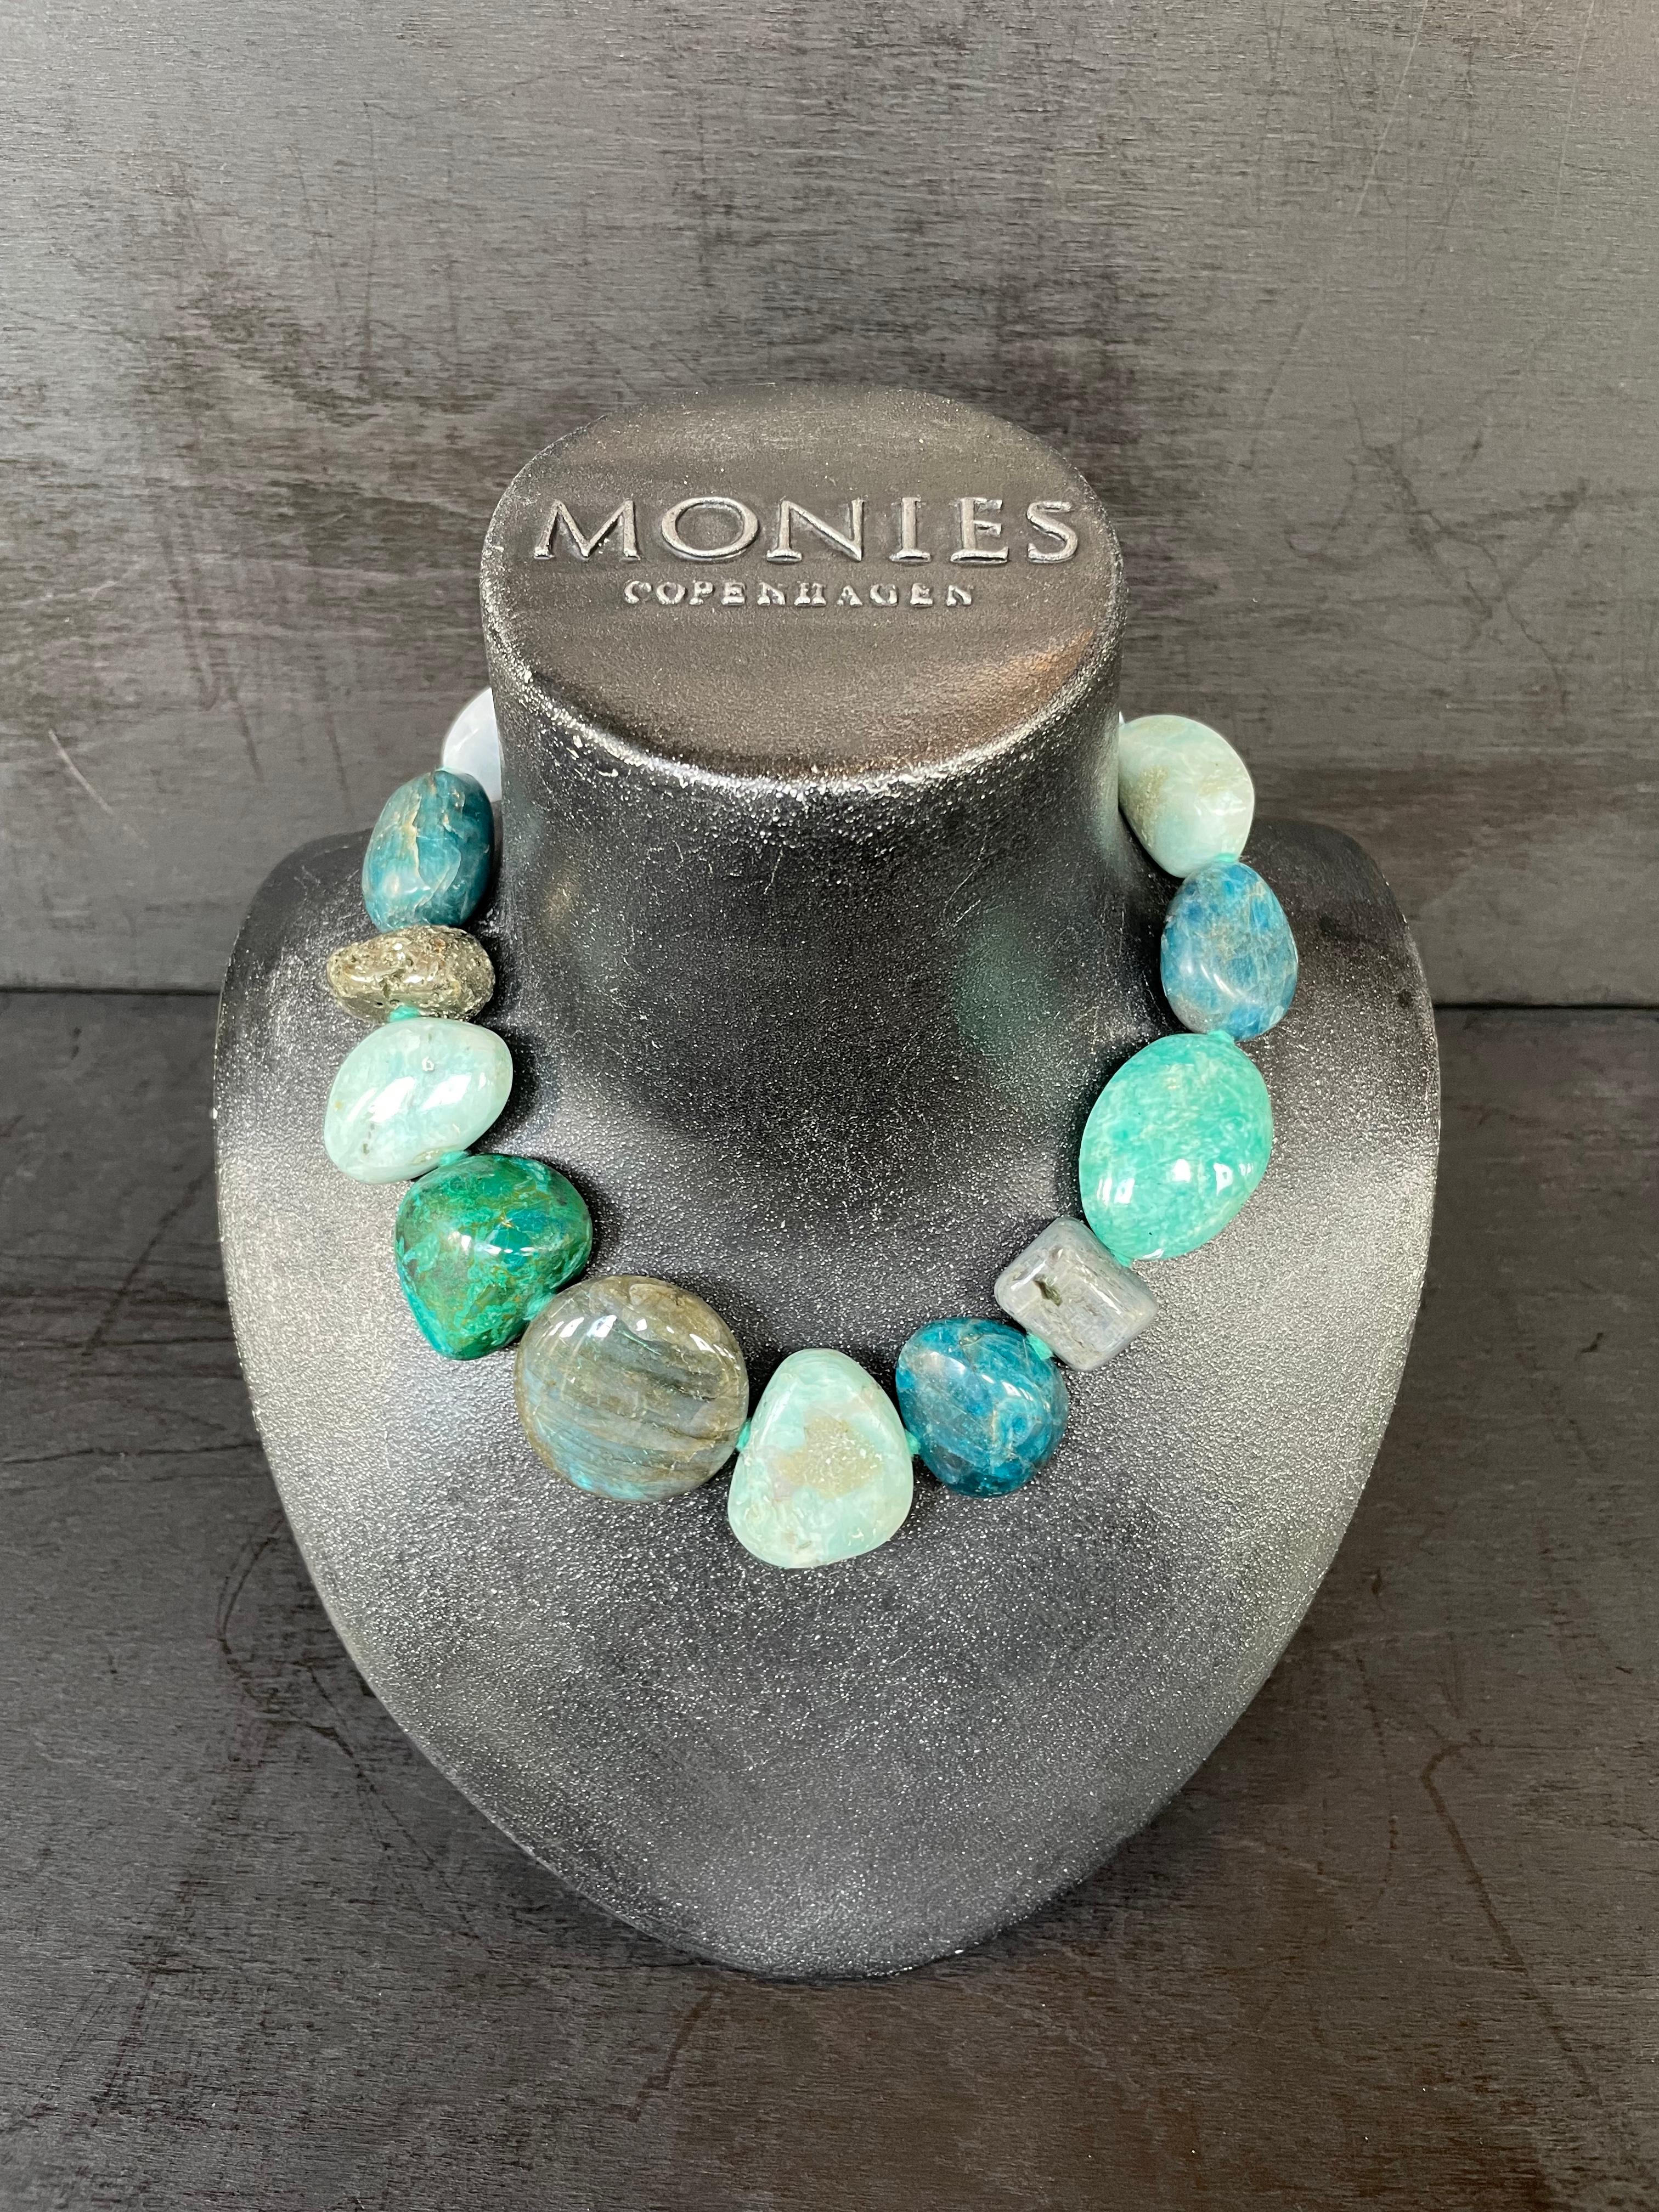 One-of-a-kind statement necklace from the Danish jewellery brand, Monies.
Made in Chalcedony, Apatite, Pyrite, Chrysocolla and Labradorite with a leather clasp.

Handcrafted in the Monies Atelier in Copenhagen.